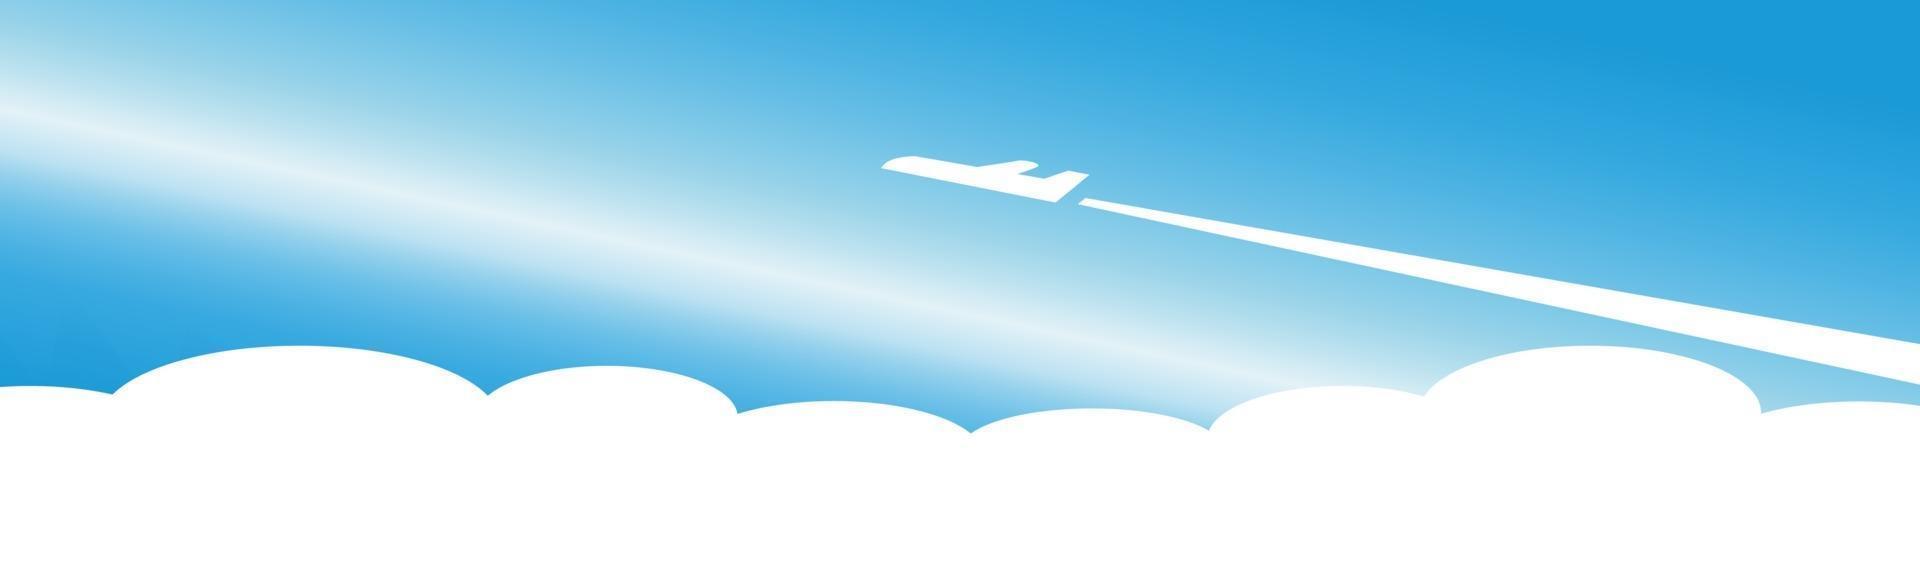 Silhouette of a plane taking off on a background of blue n - Vector